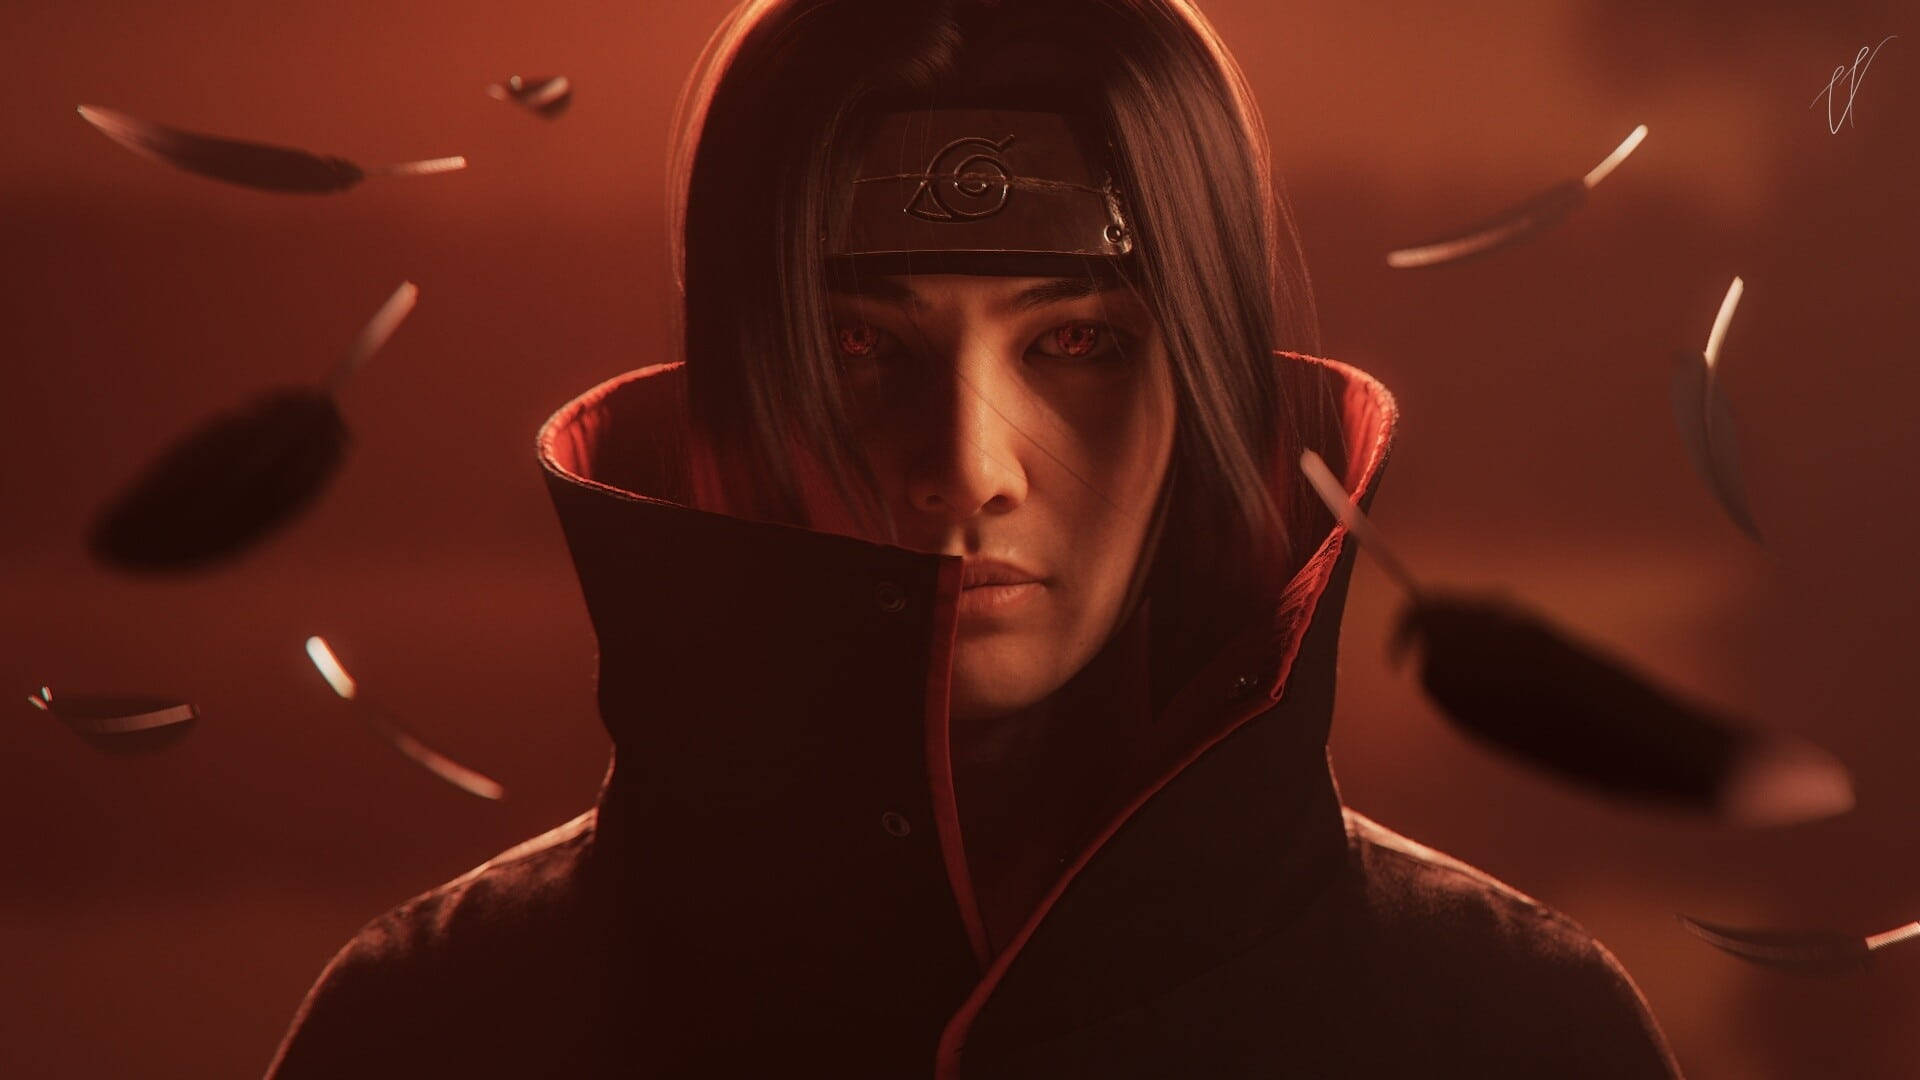 Free Itachi Cool Wallpaper Downloads, [100+] Itachi Cool Wallpapers for  FREE 